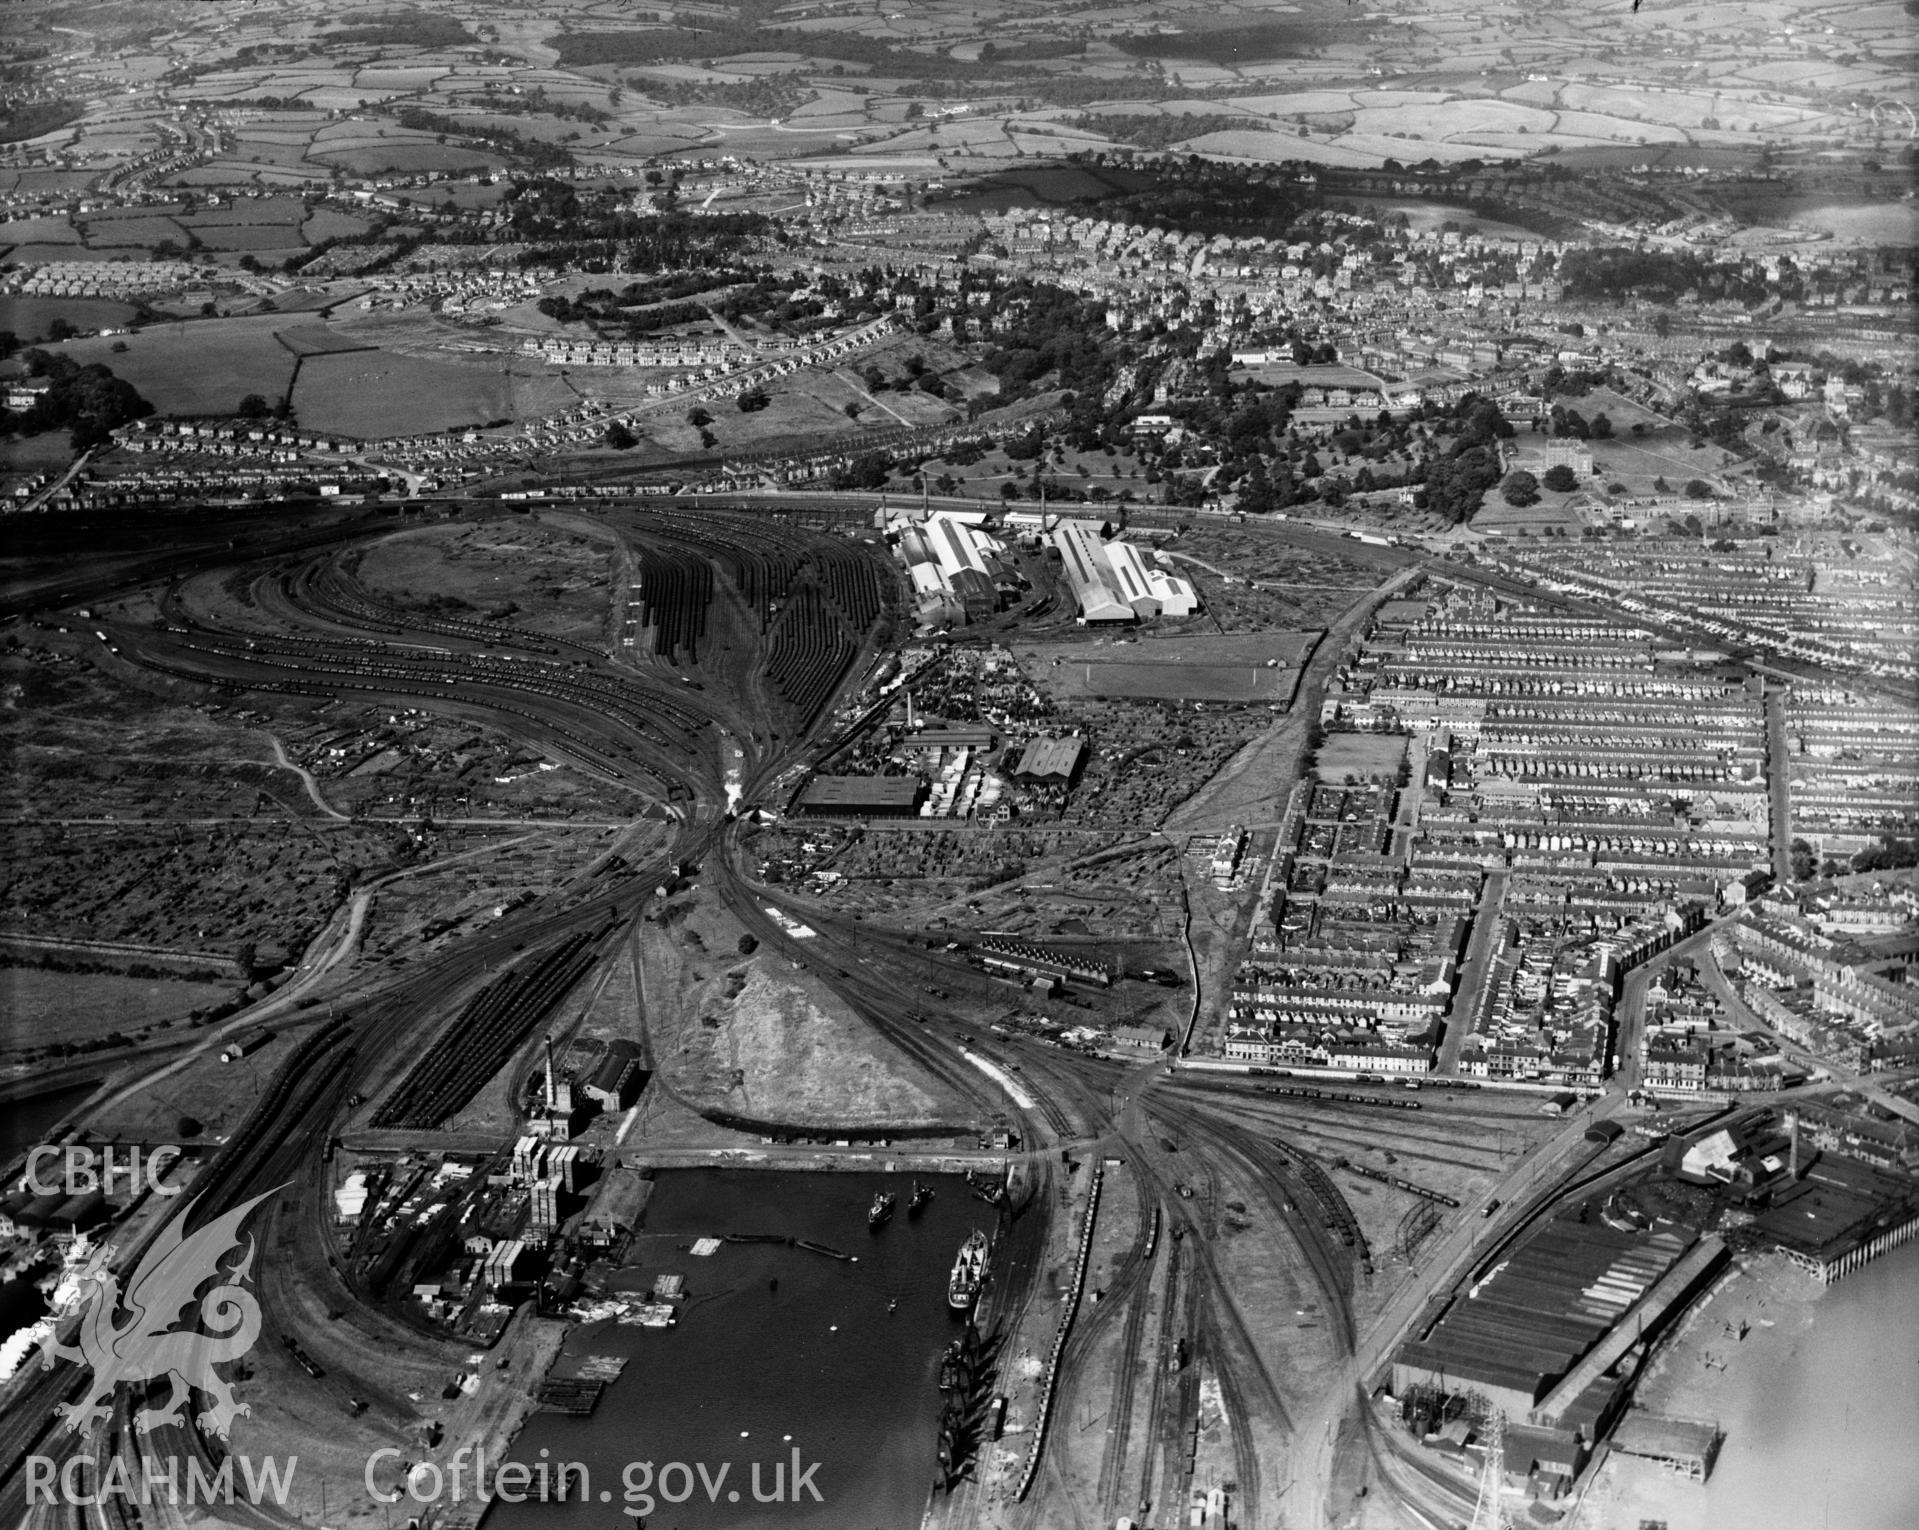 General view of Newport showing docks, oblique aerial view. 5?x4? black and white glass plate negative.